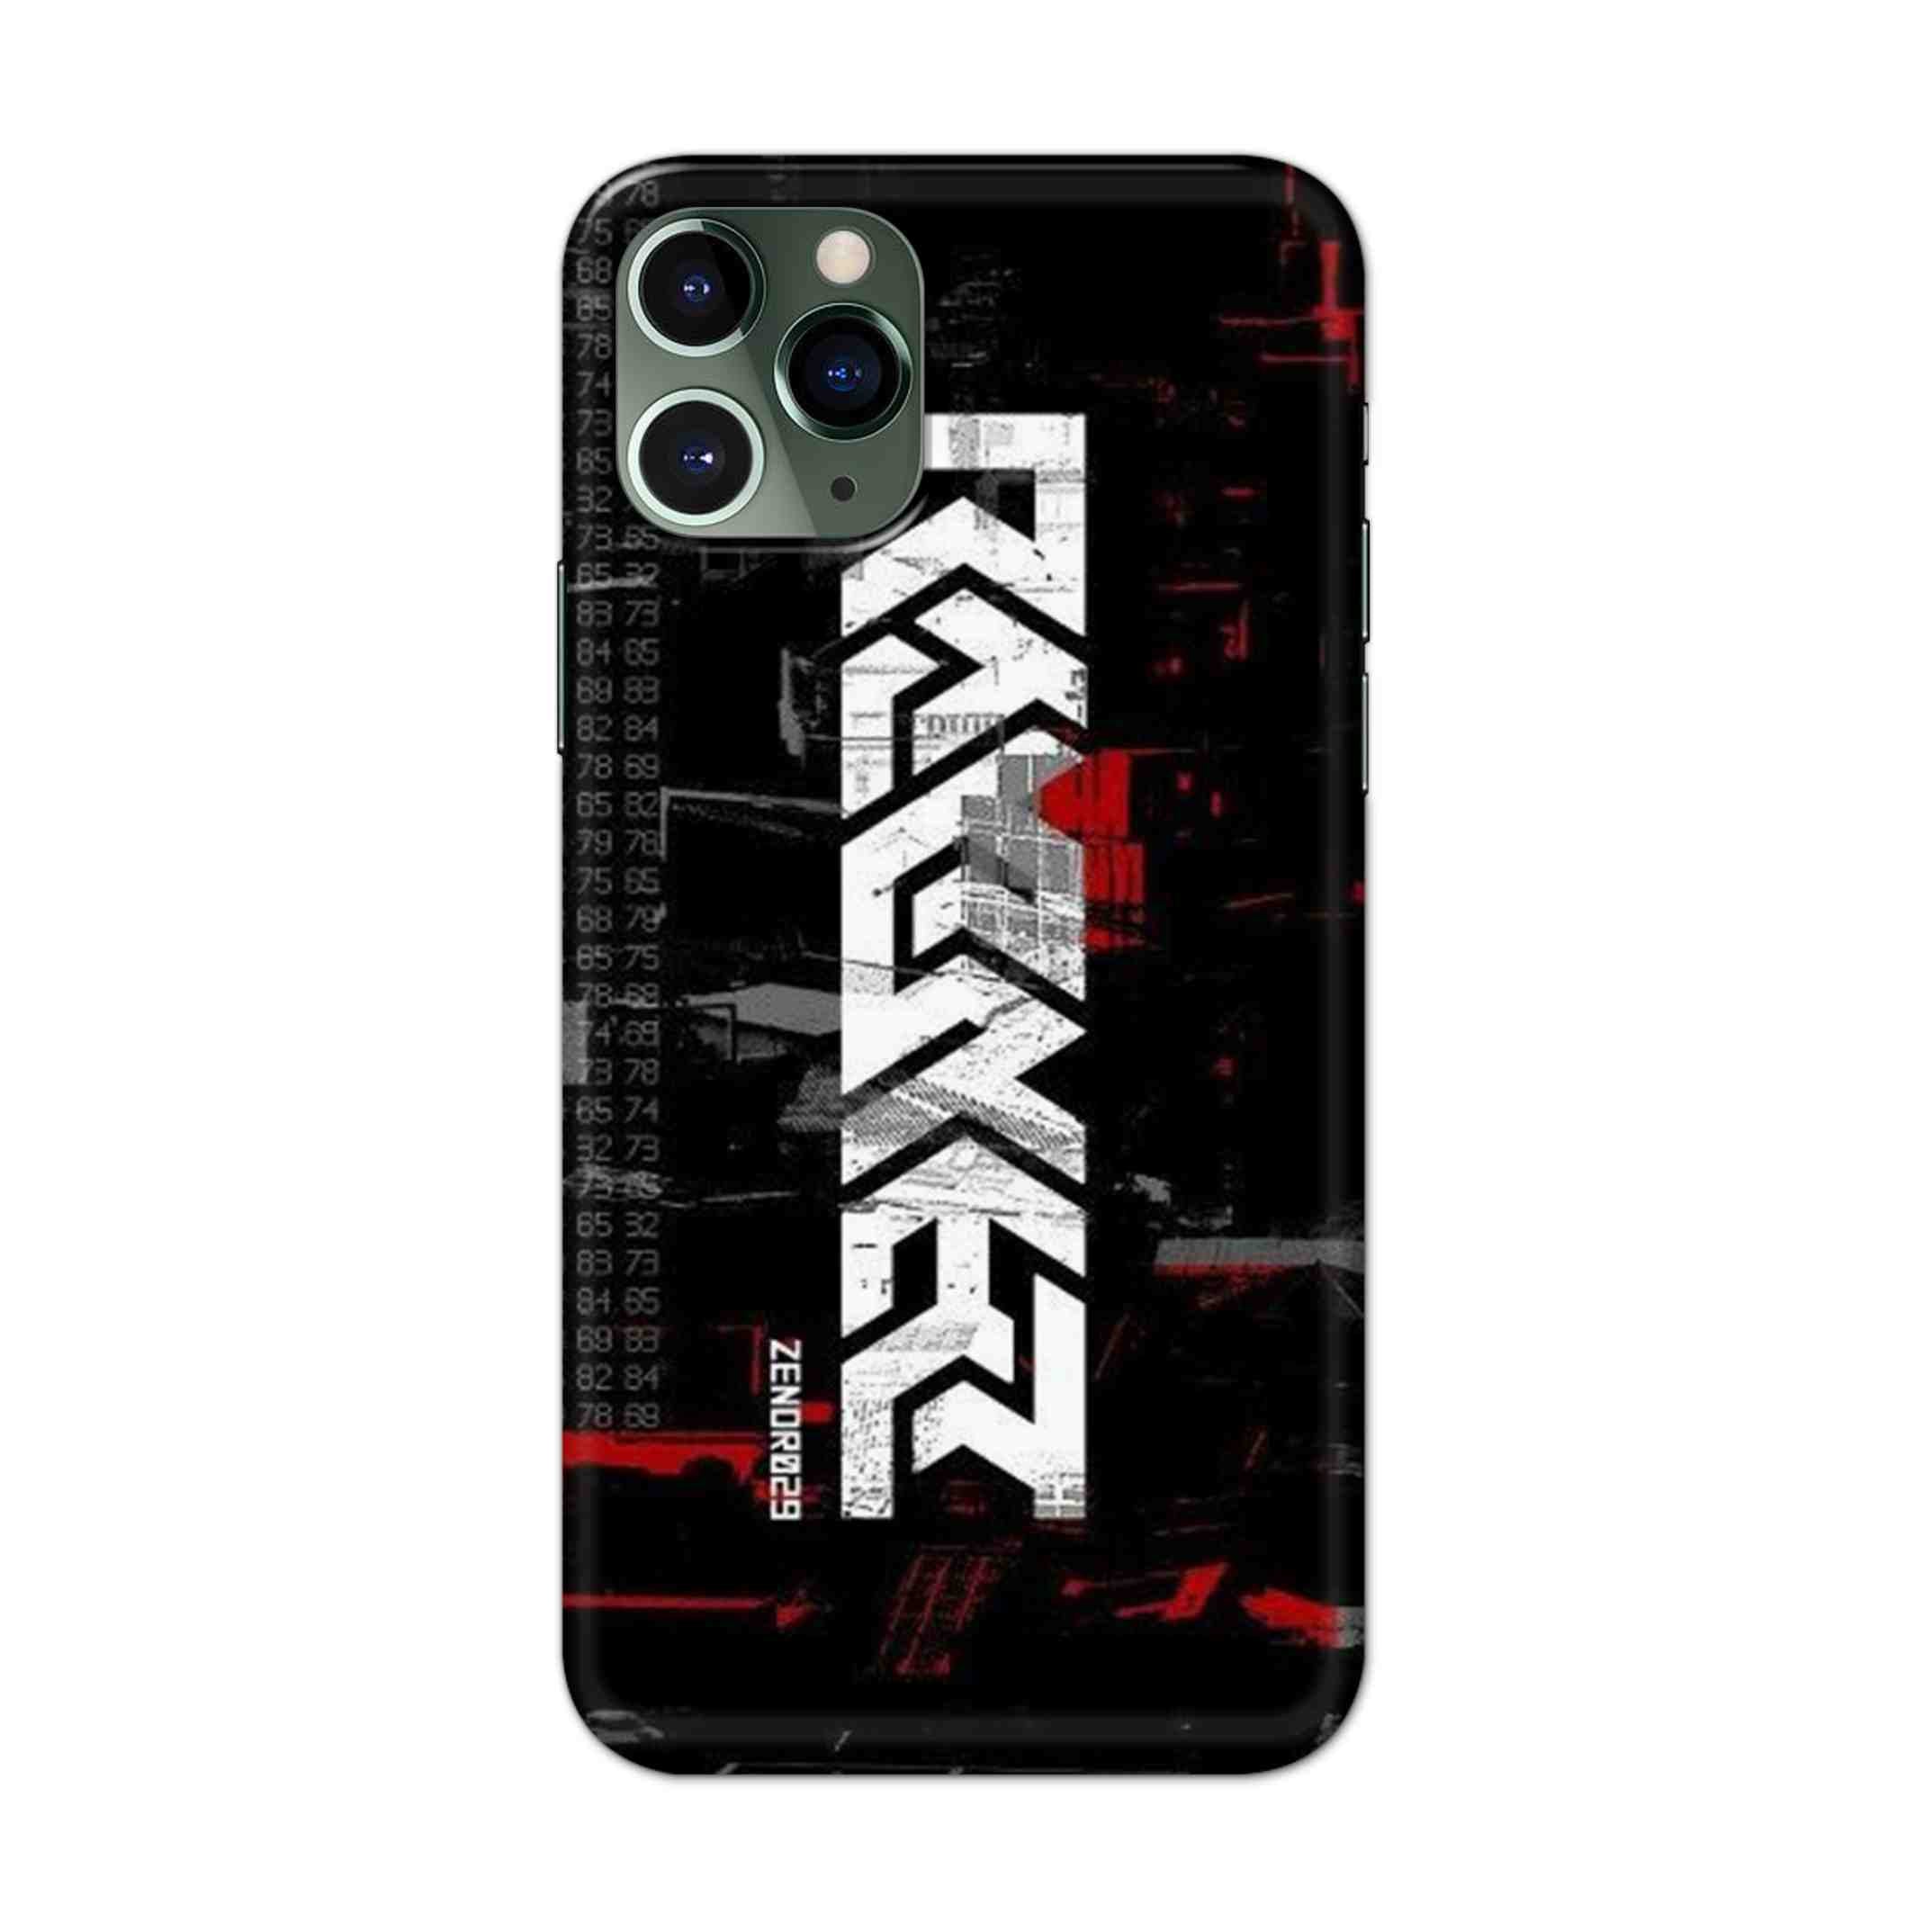 Buy Raxer Hard Back Mobile Phone Case/Cover For iPhone 11 Pro Max Online